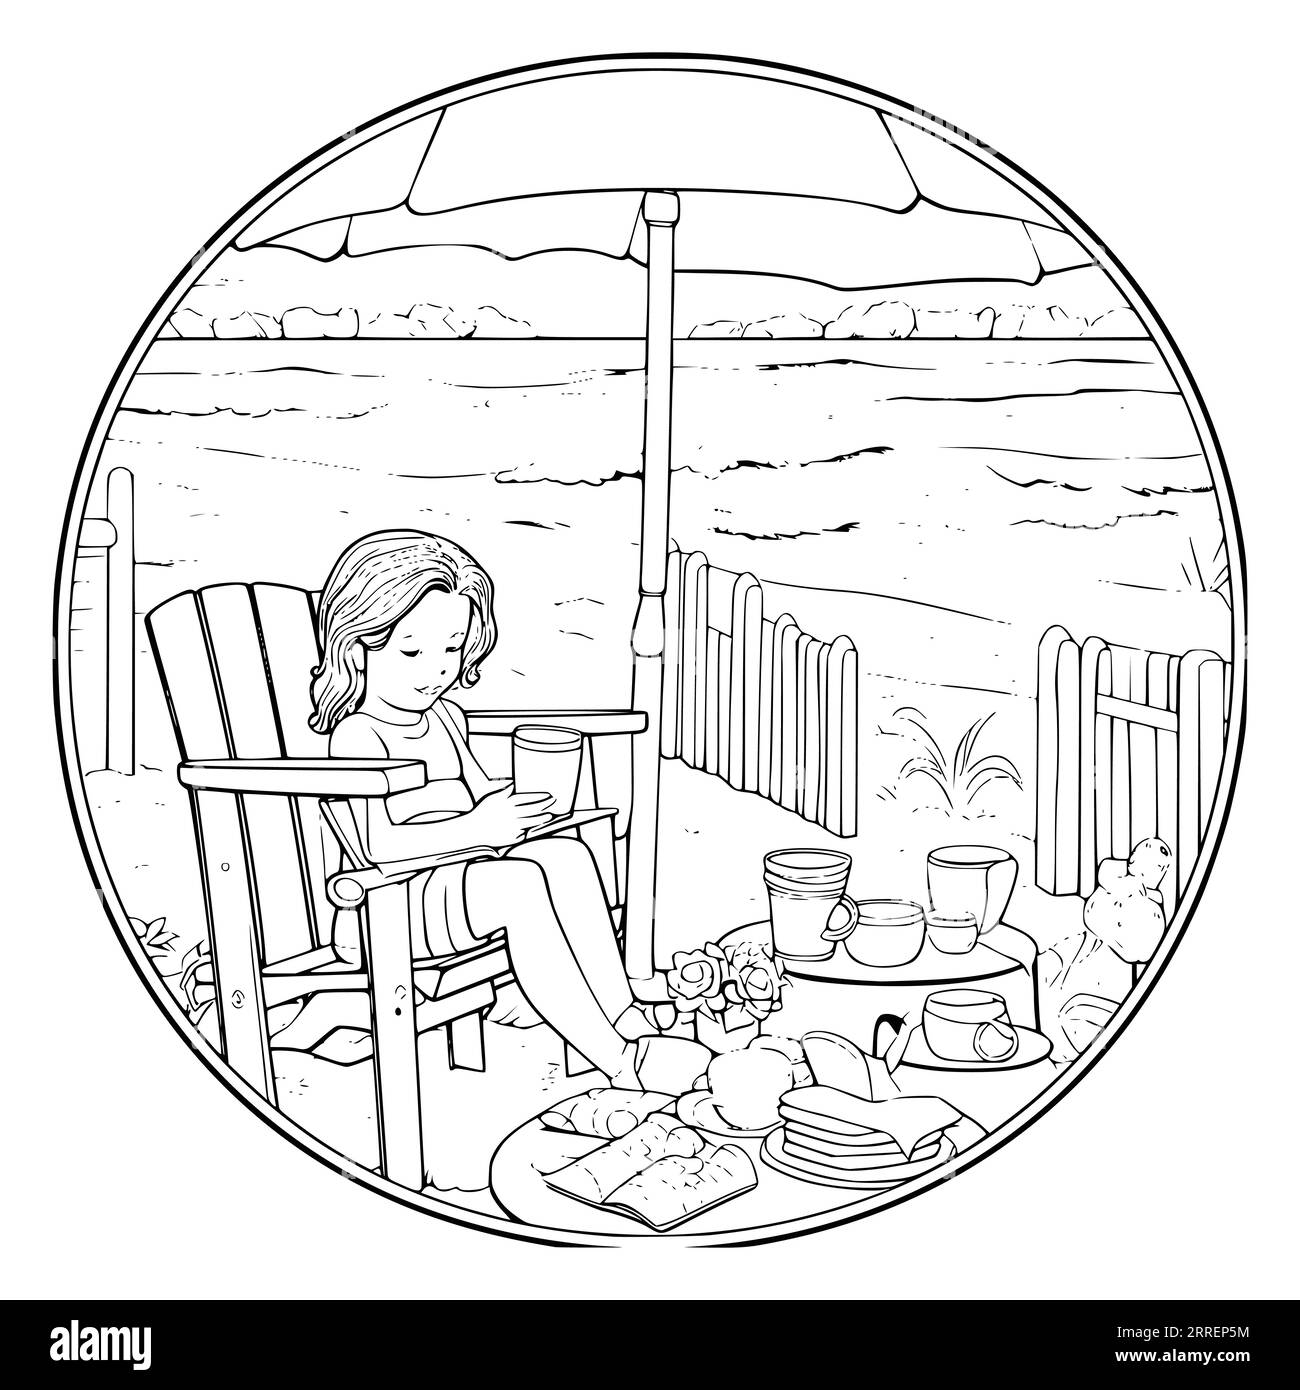 Summer Vacation Coloring Page for Kids Stock Vector